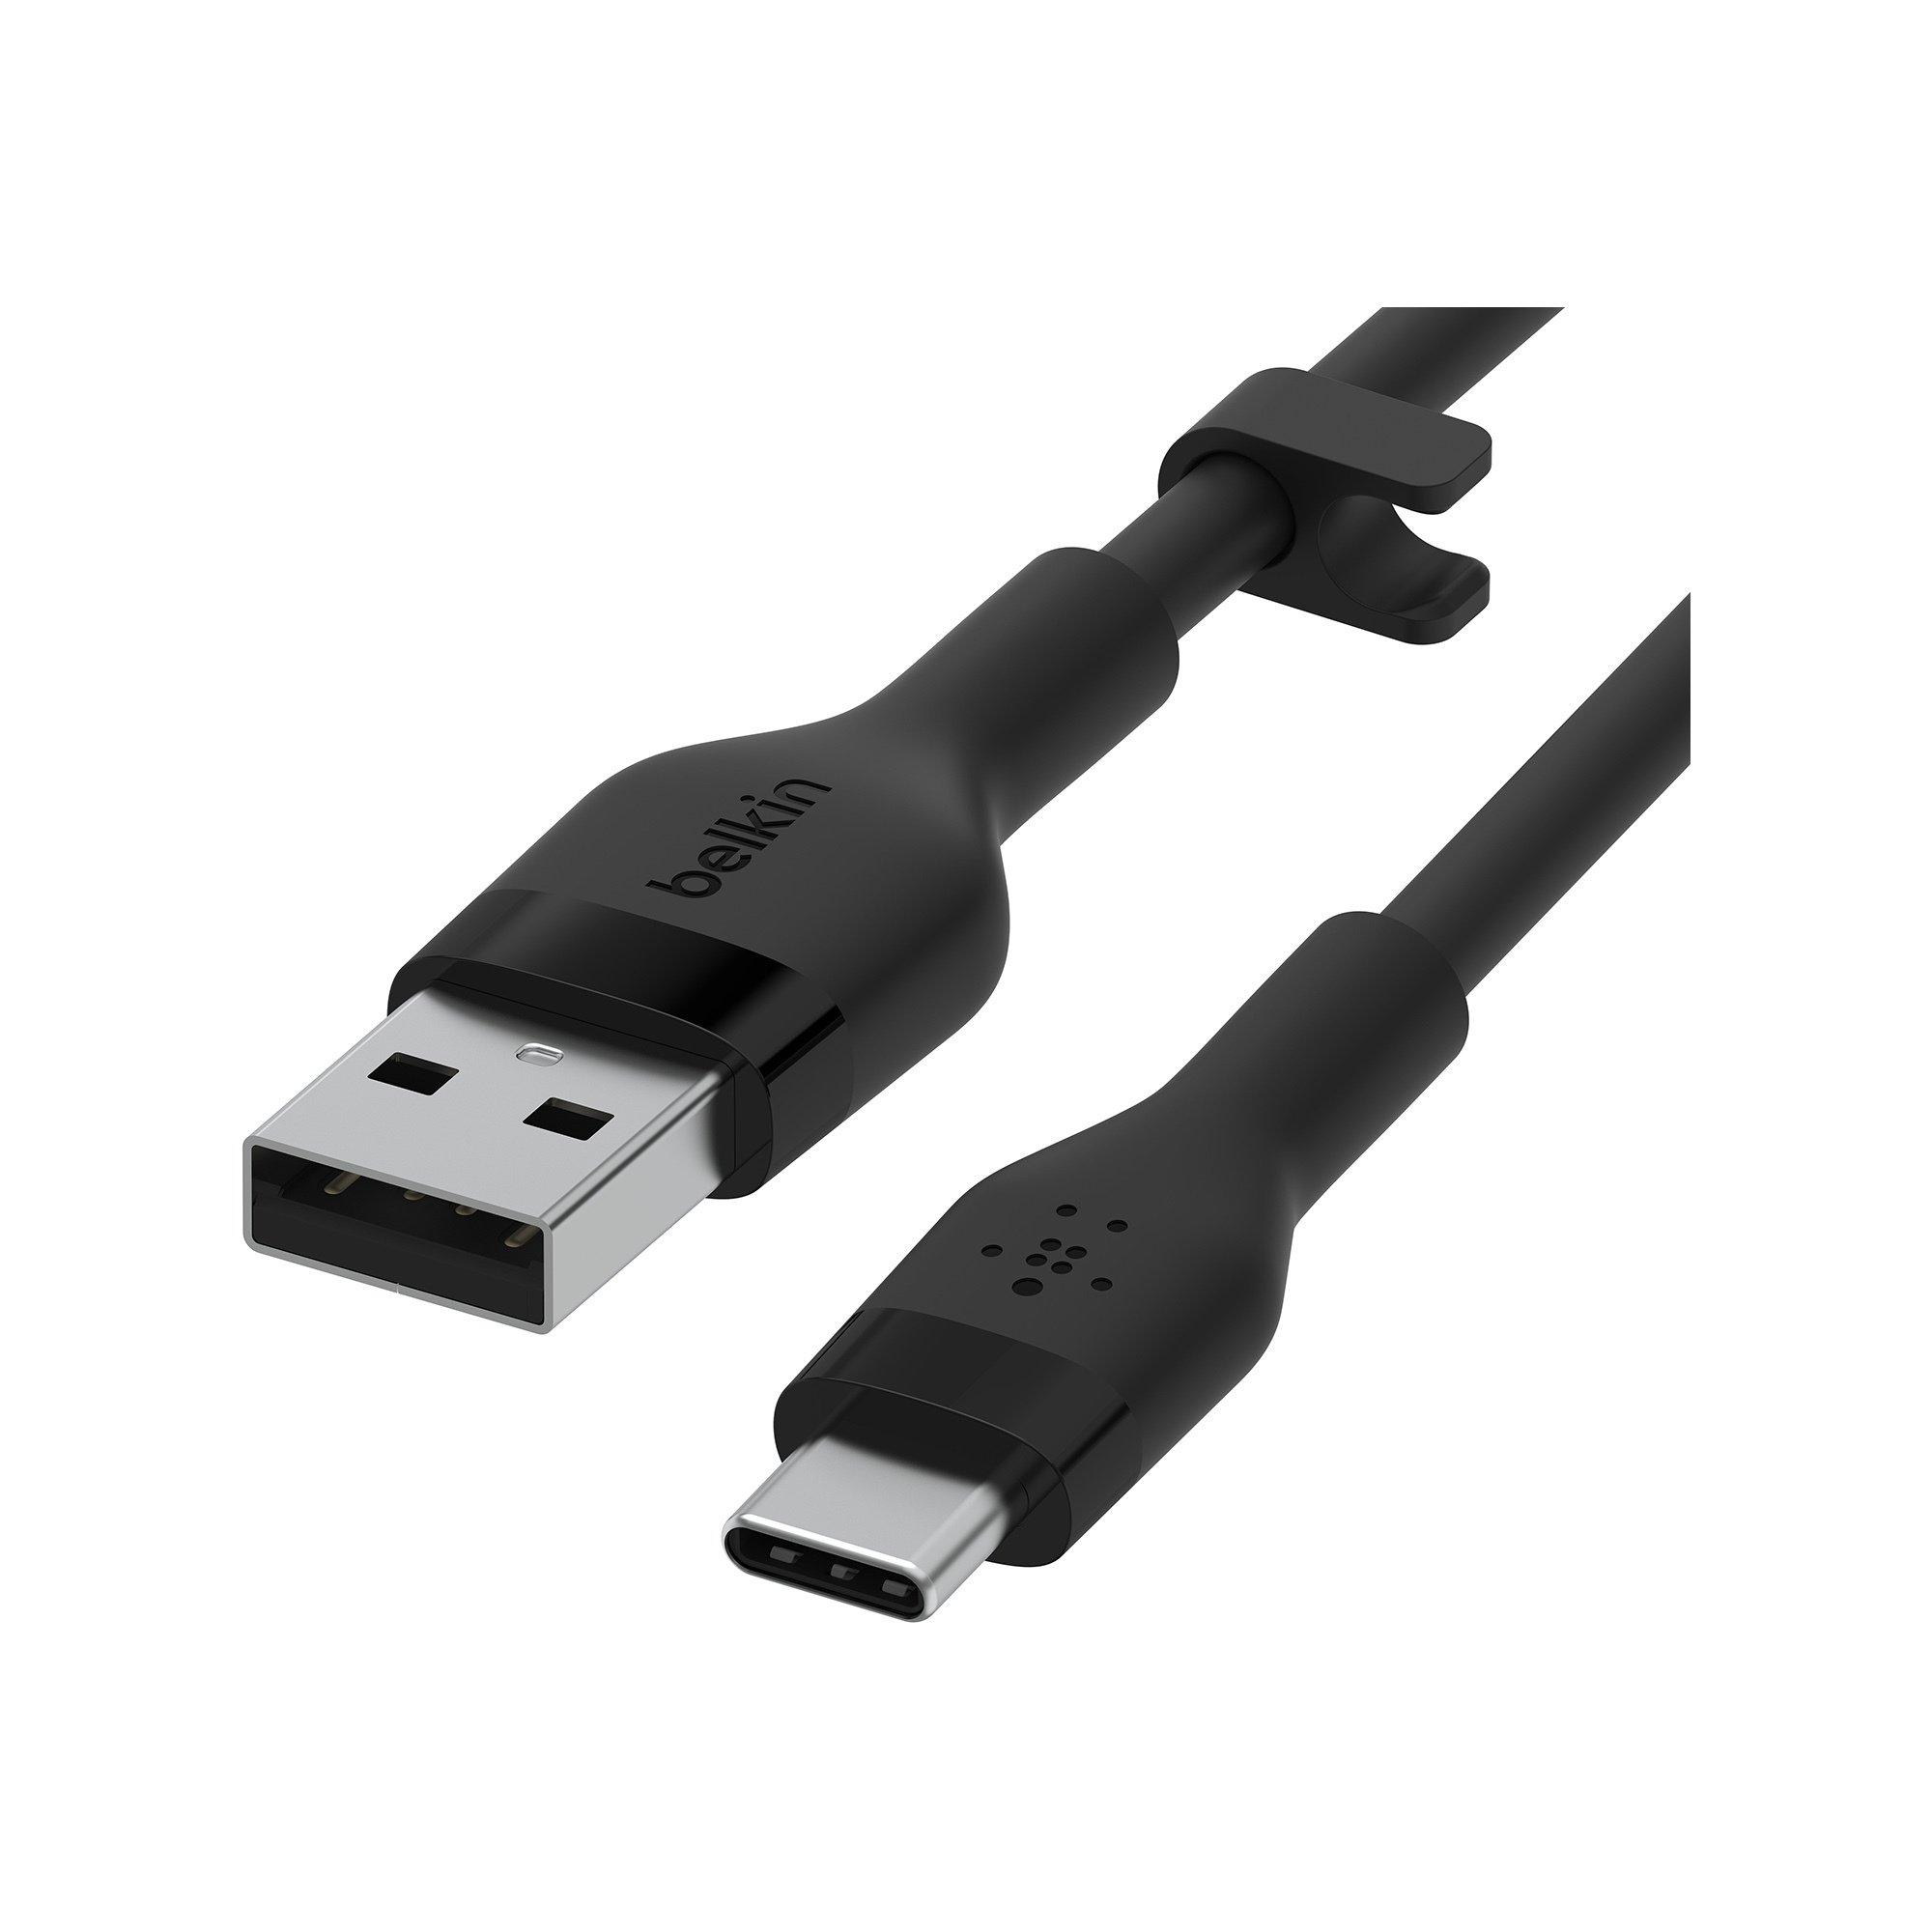 belkin oost Charge Flex USB-A to USB-C Cable, 1m Cavo USB-C di ricarica/sync 